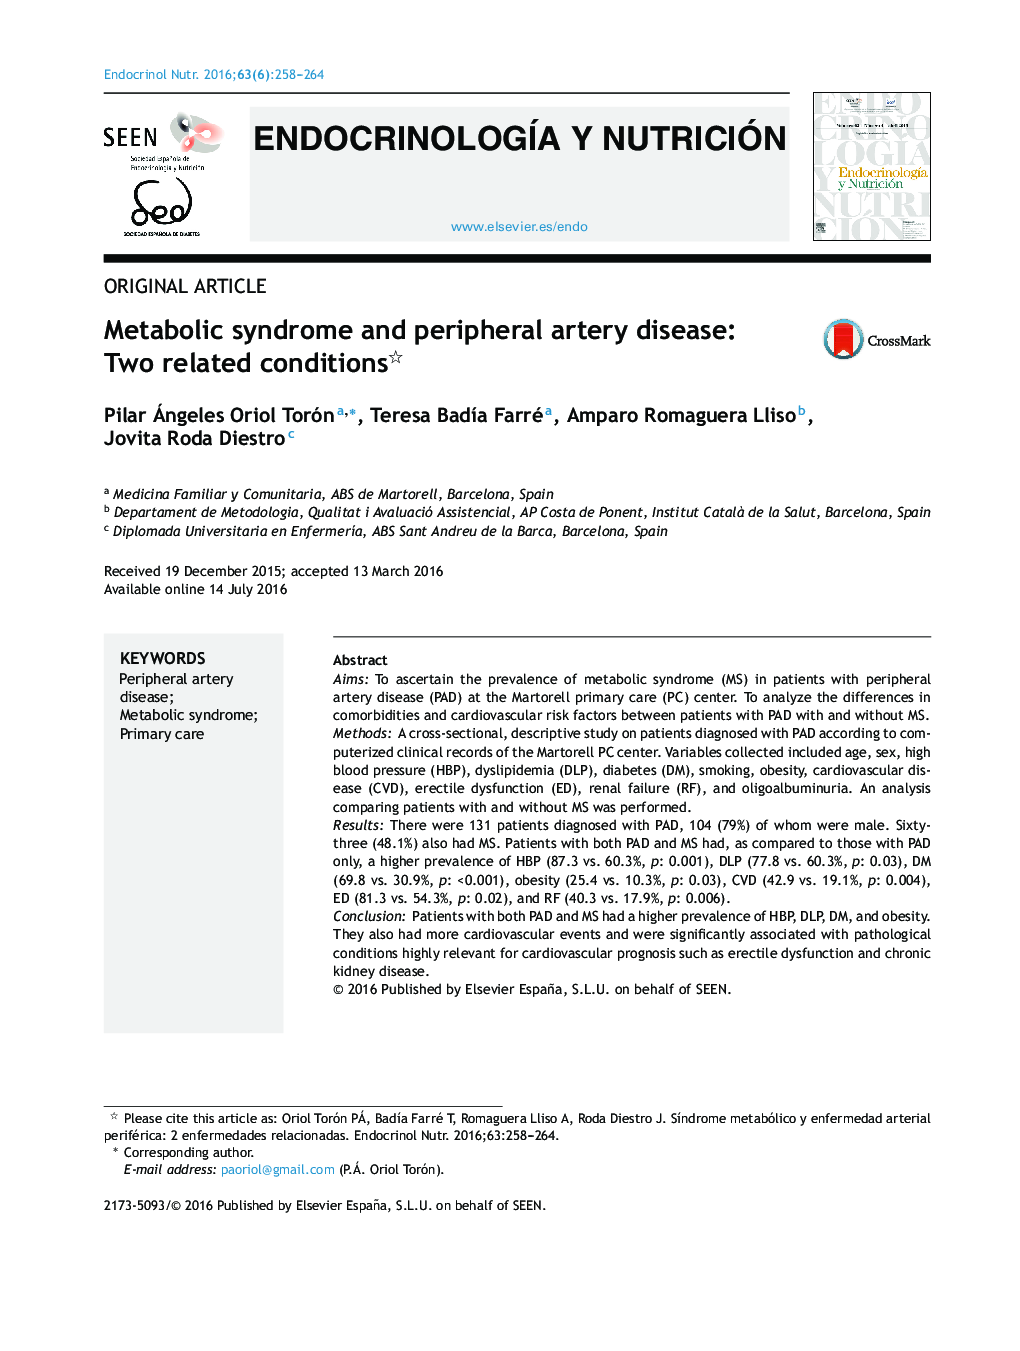 Metabolic syndrome and peripheral artery disease: Two related conditions 